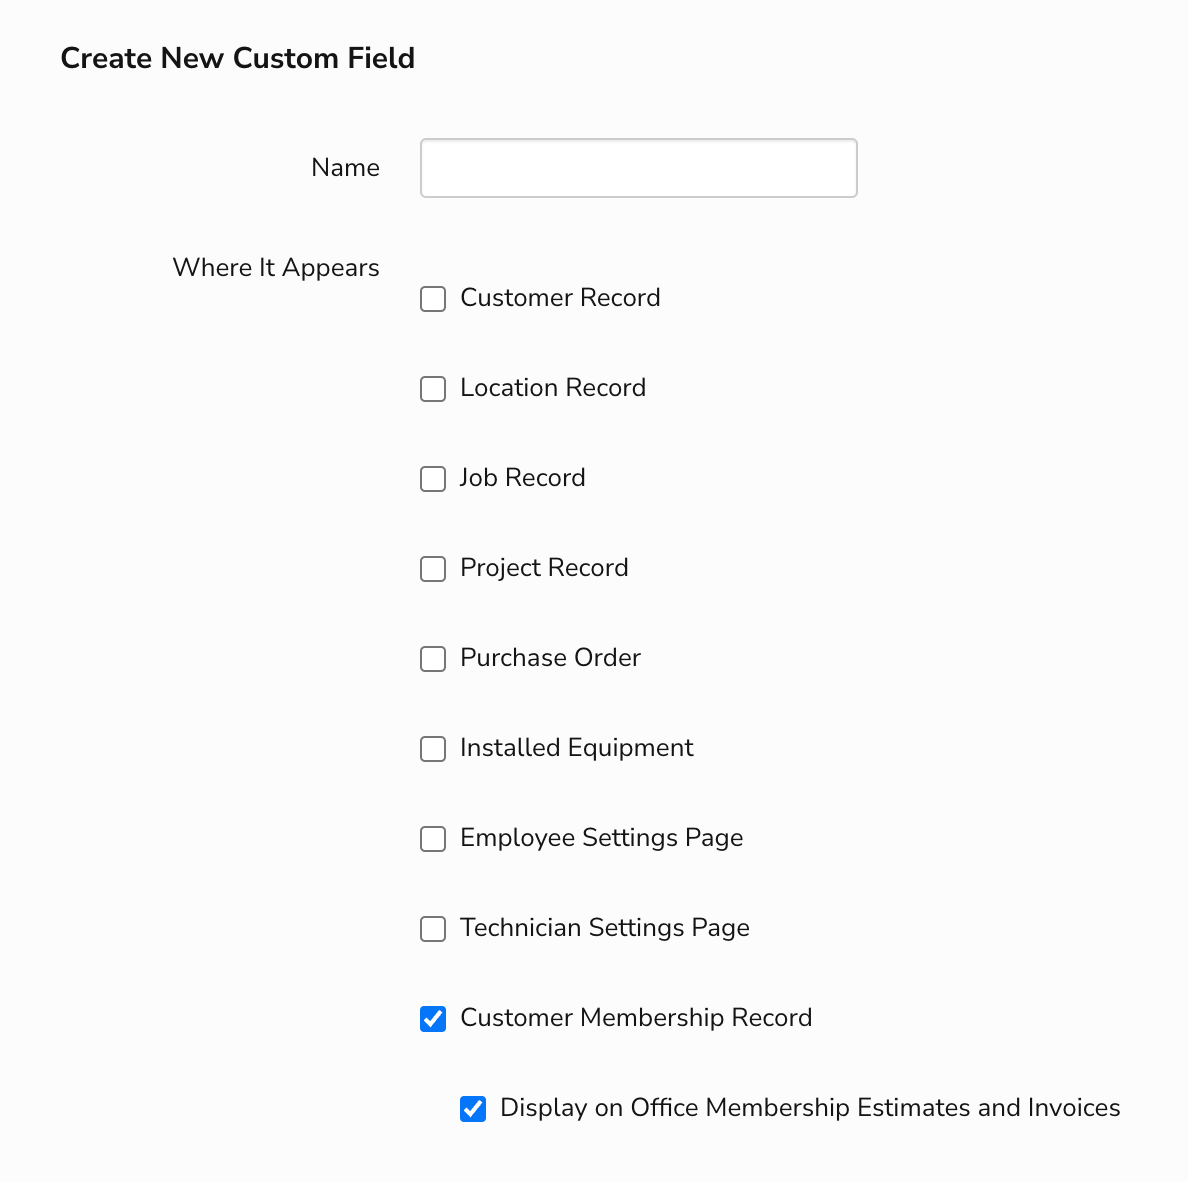 An image showing the Create New Custom Field screen. Customer Membership Record has been selected, which opens a new option for Display on Office Membership Estimates and Invoices, which has also been selected.